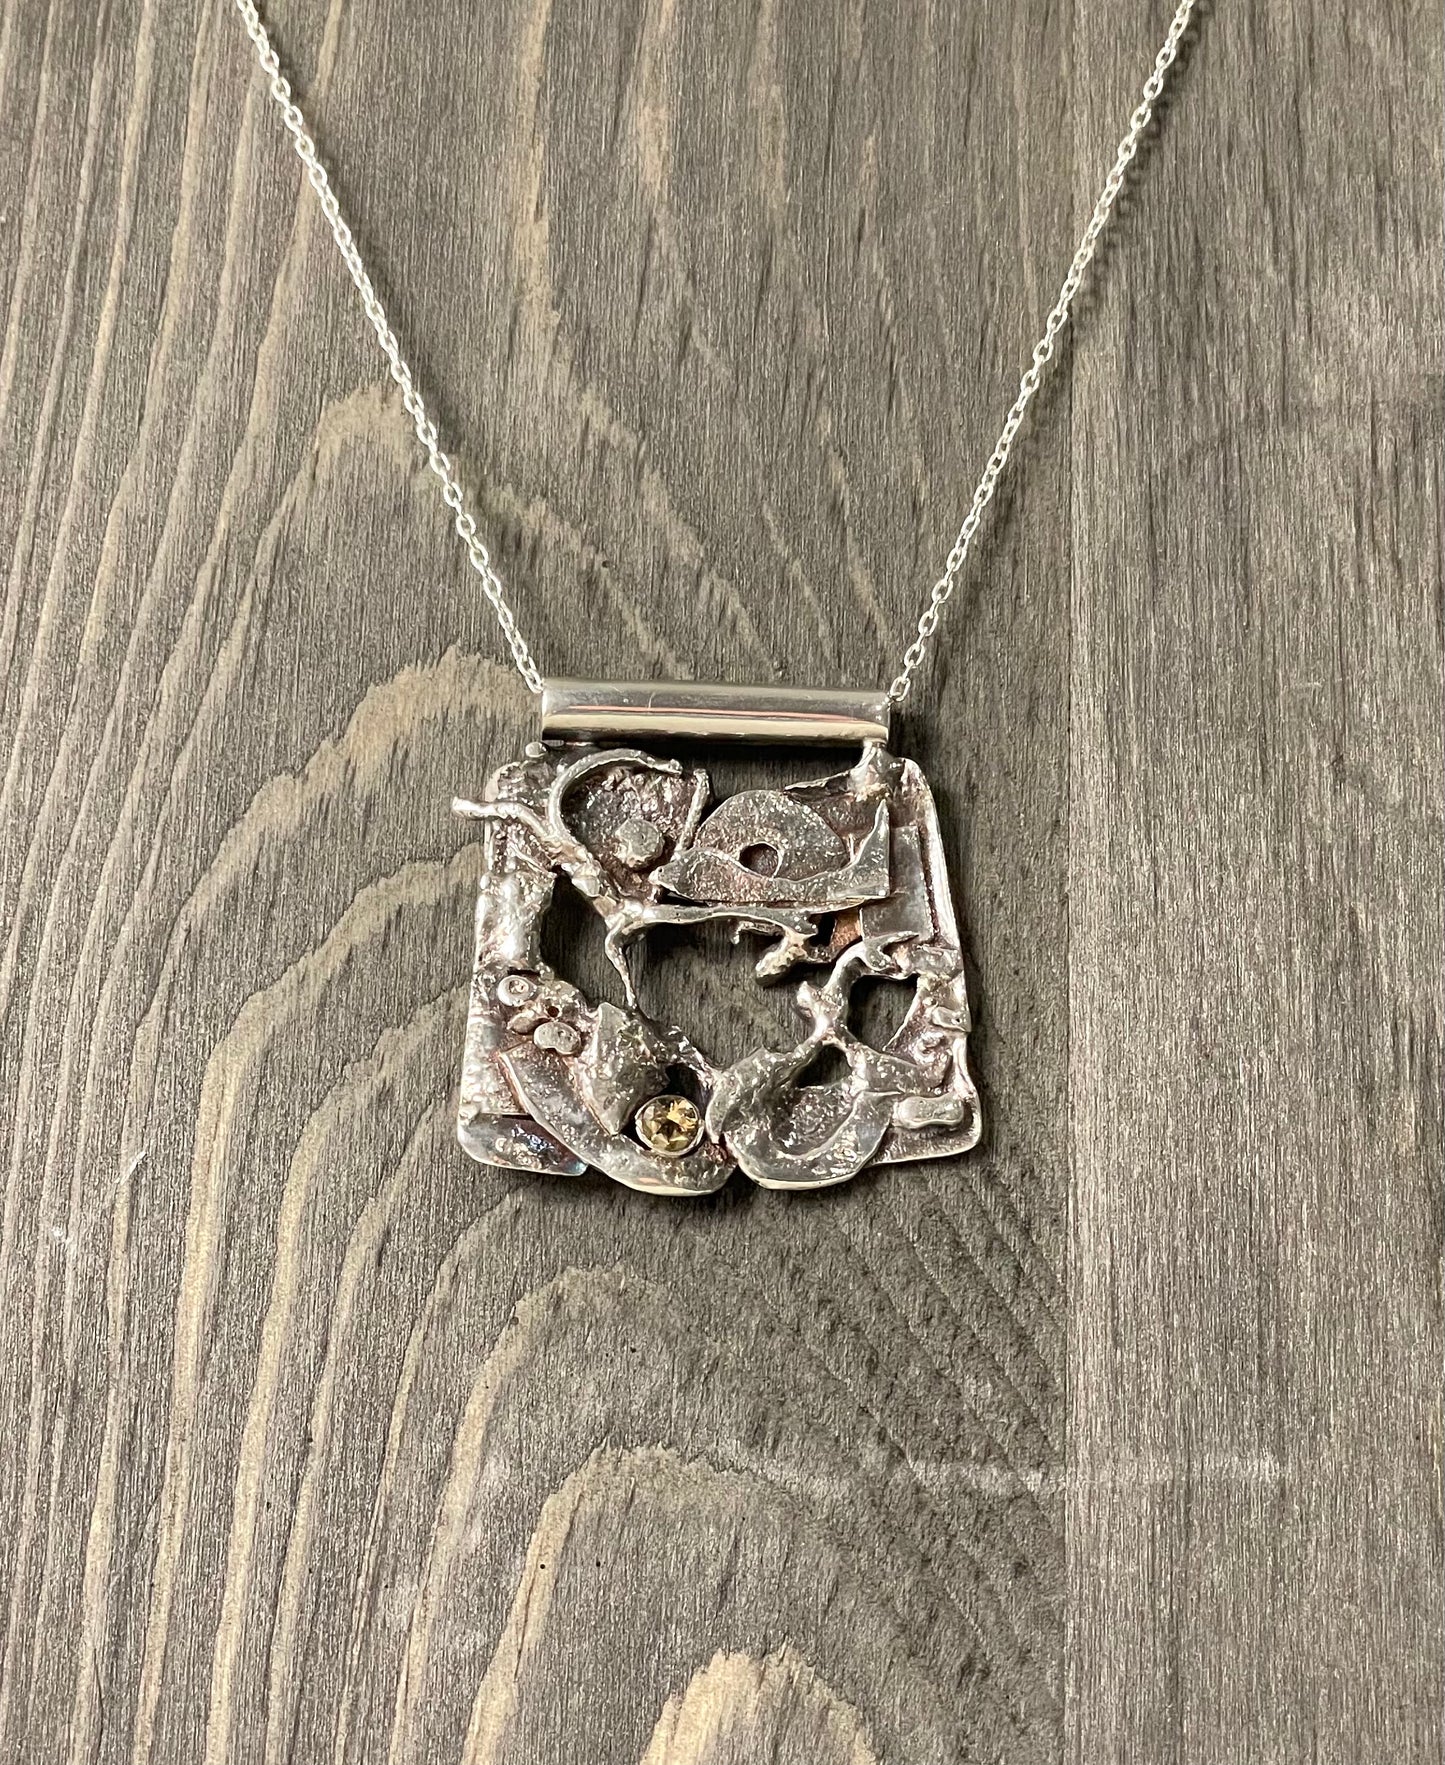 Sterling Silver Recycled Scrap Pendant with Citrine